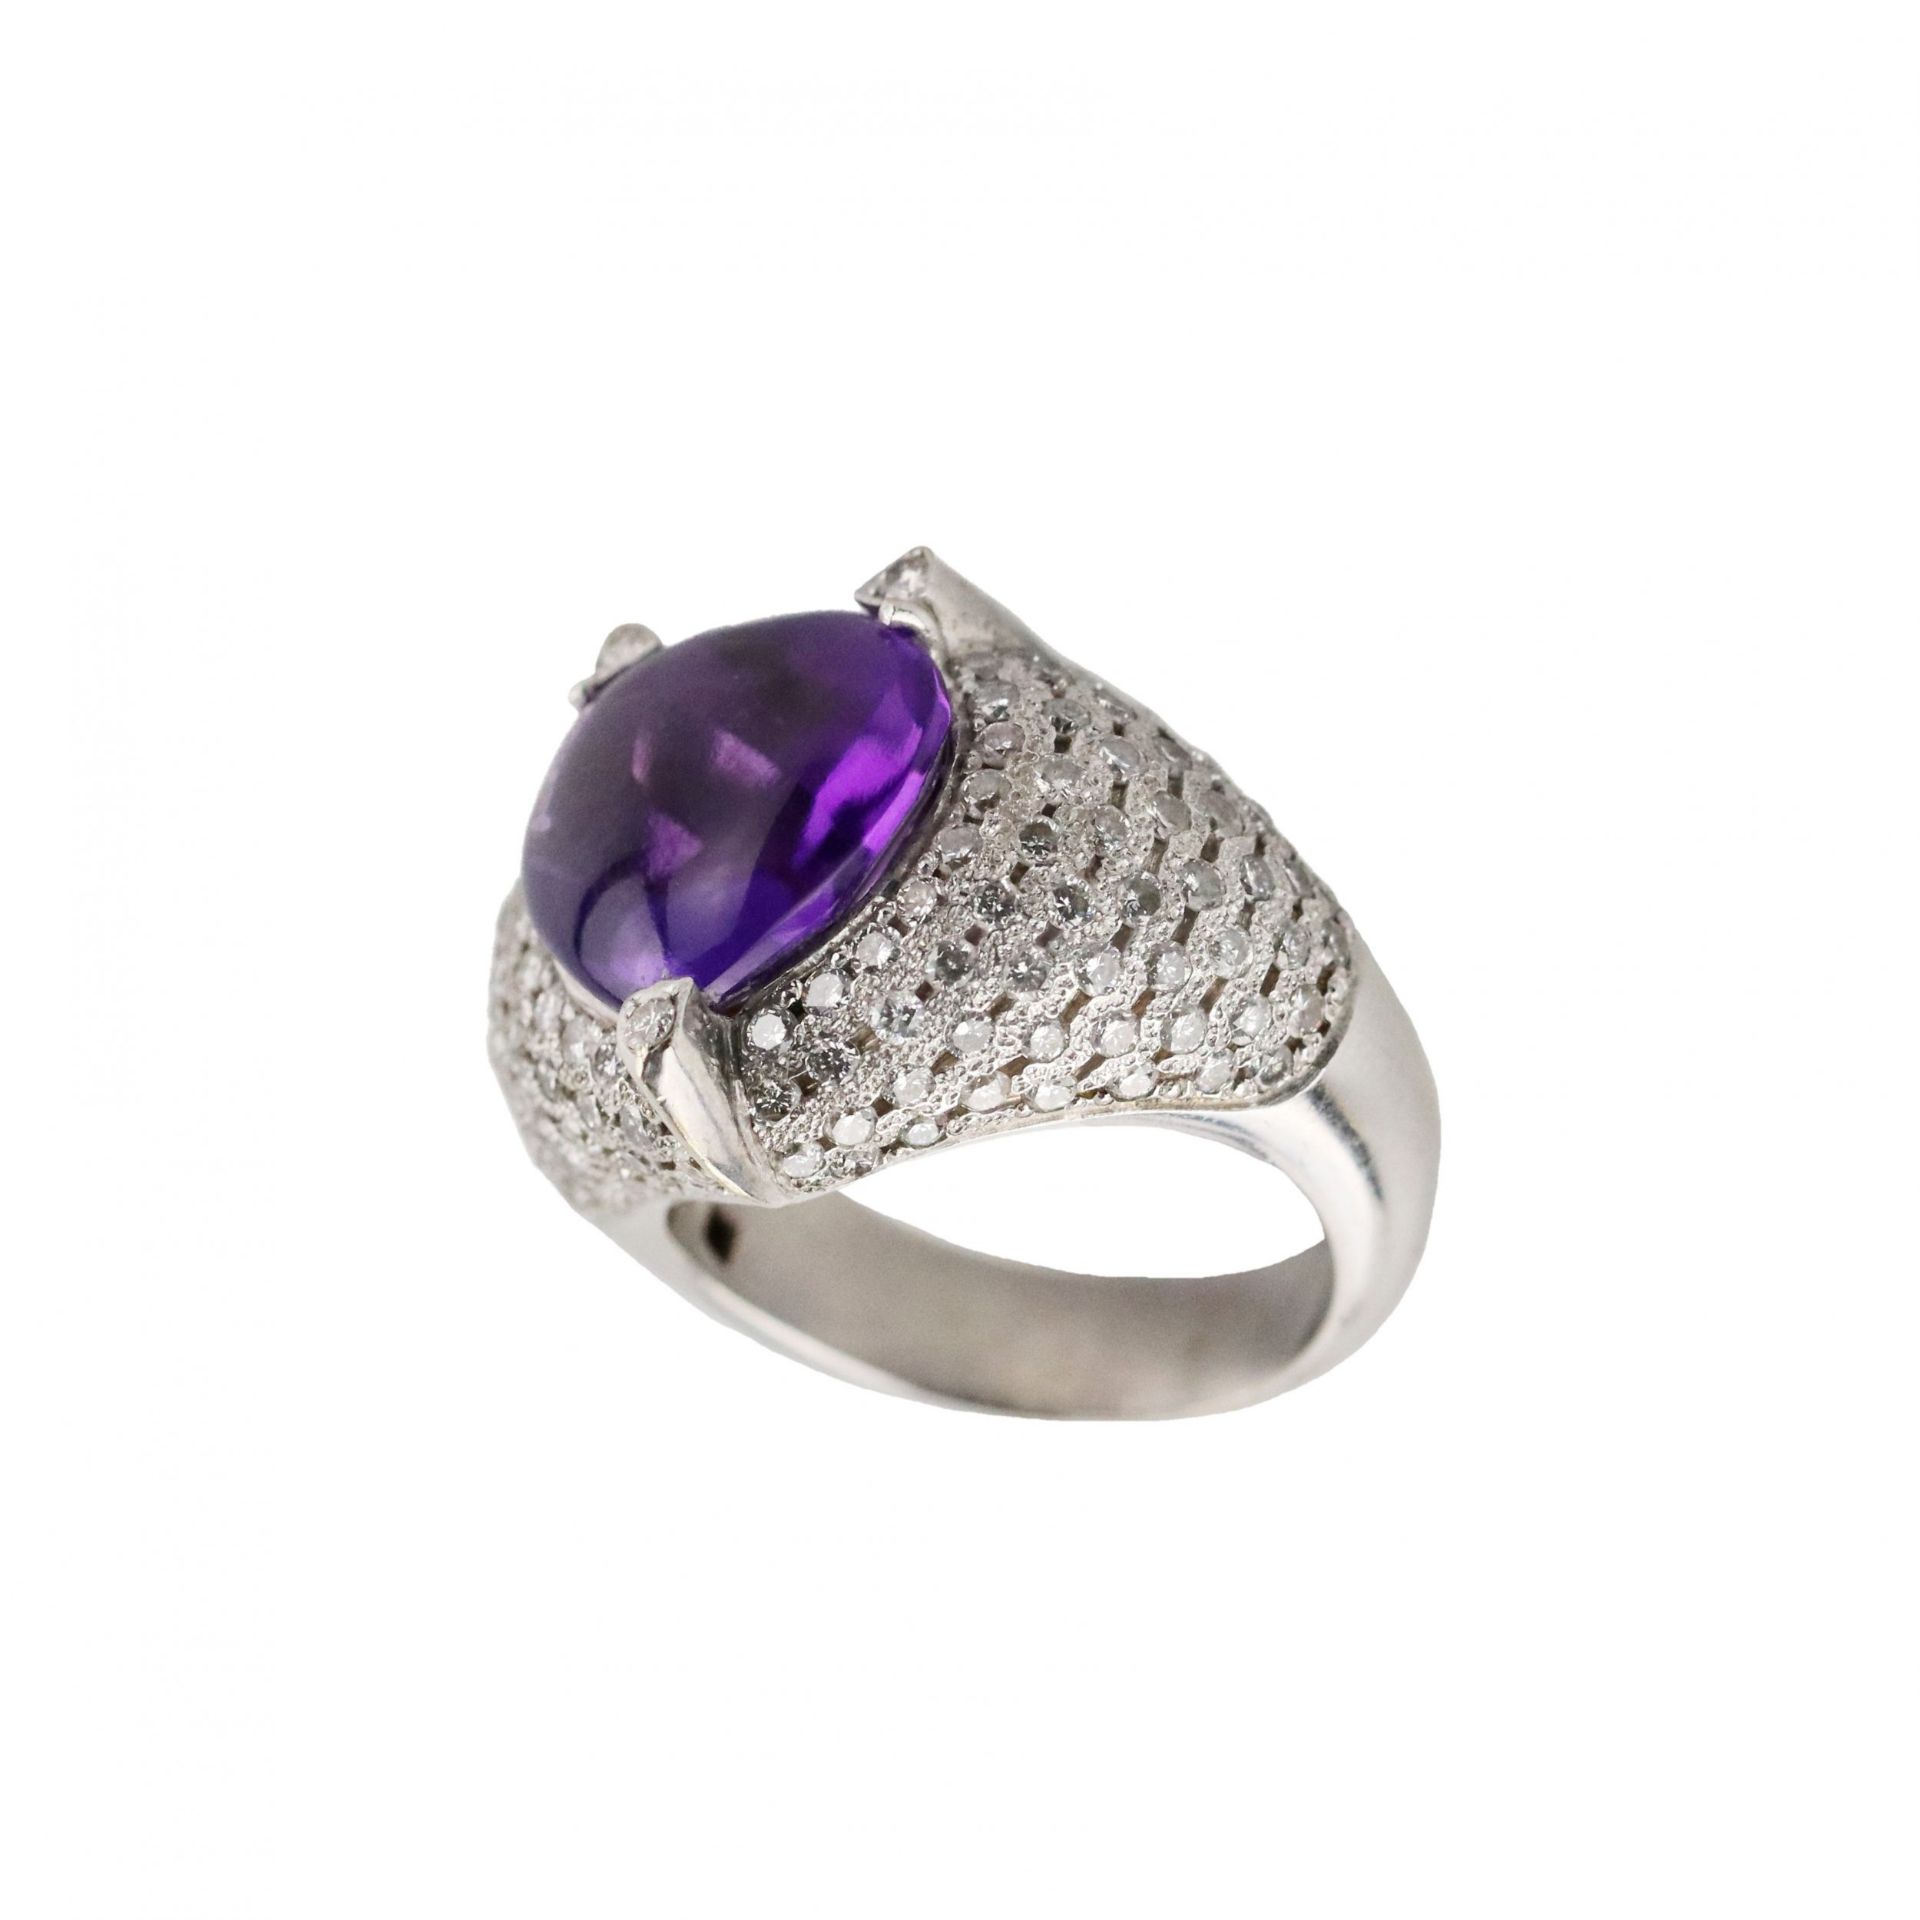 Jewelry set: ring with earrings, white gold with amethysts and diamonds. - Image 3 of 11